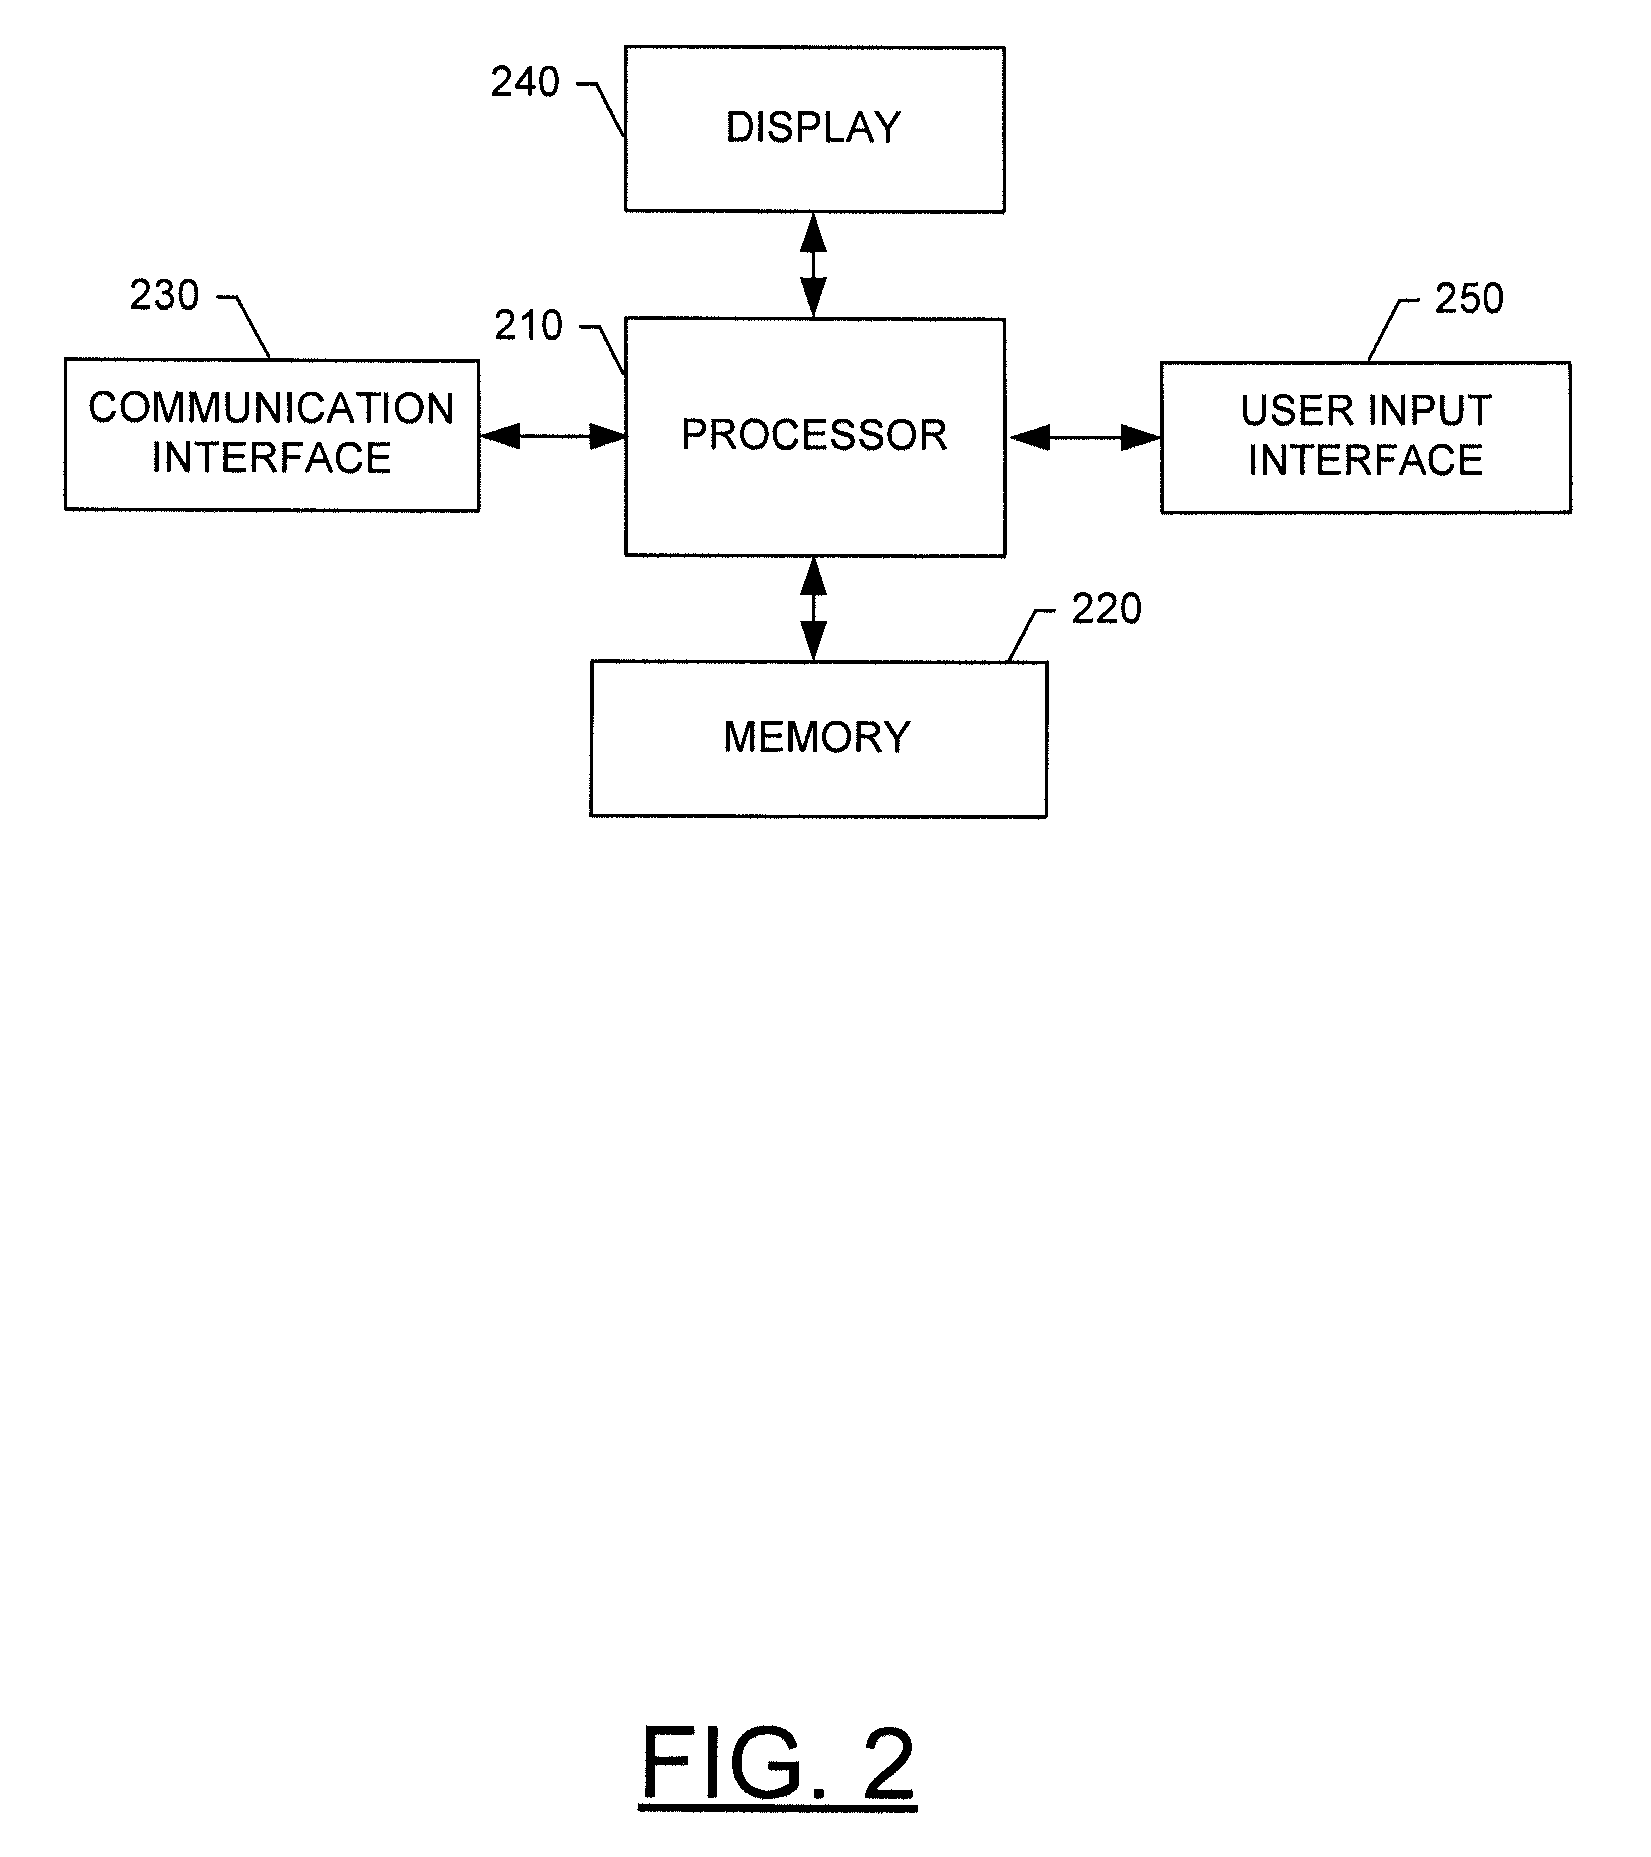 Apparatus, method and computer program product for generating a personalized visualization of broadcasting stations